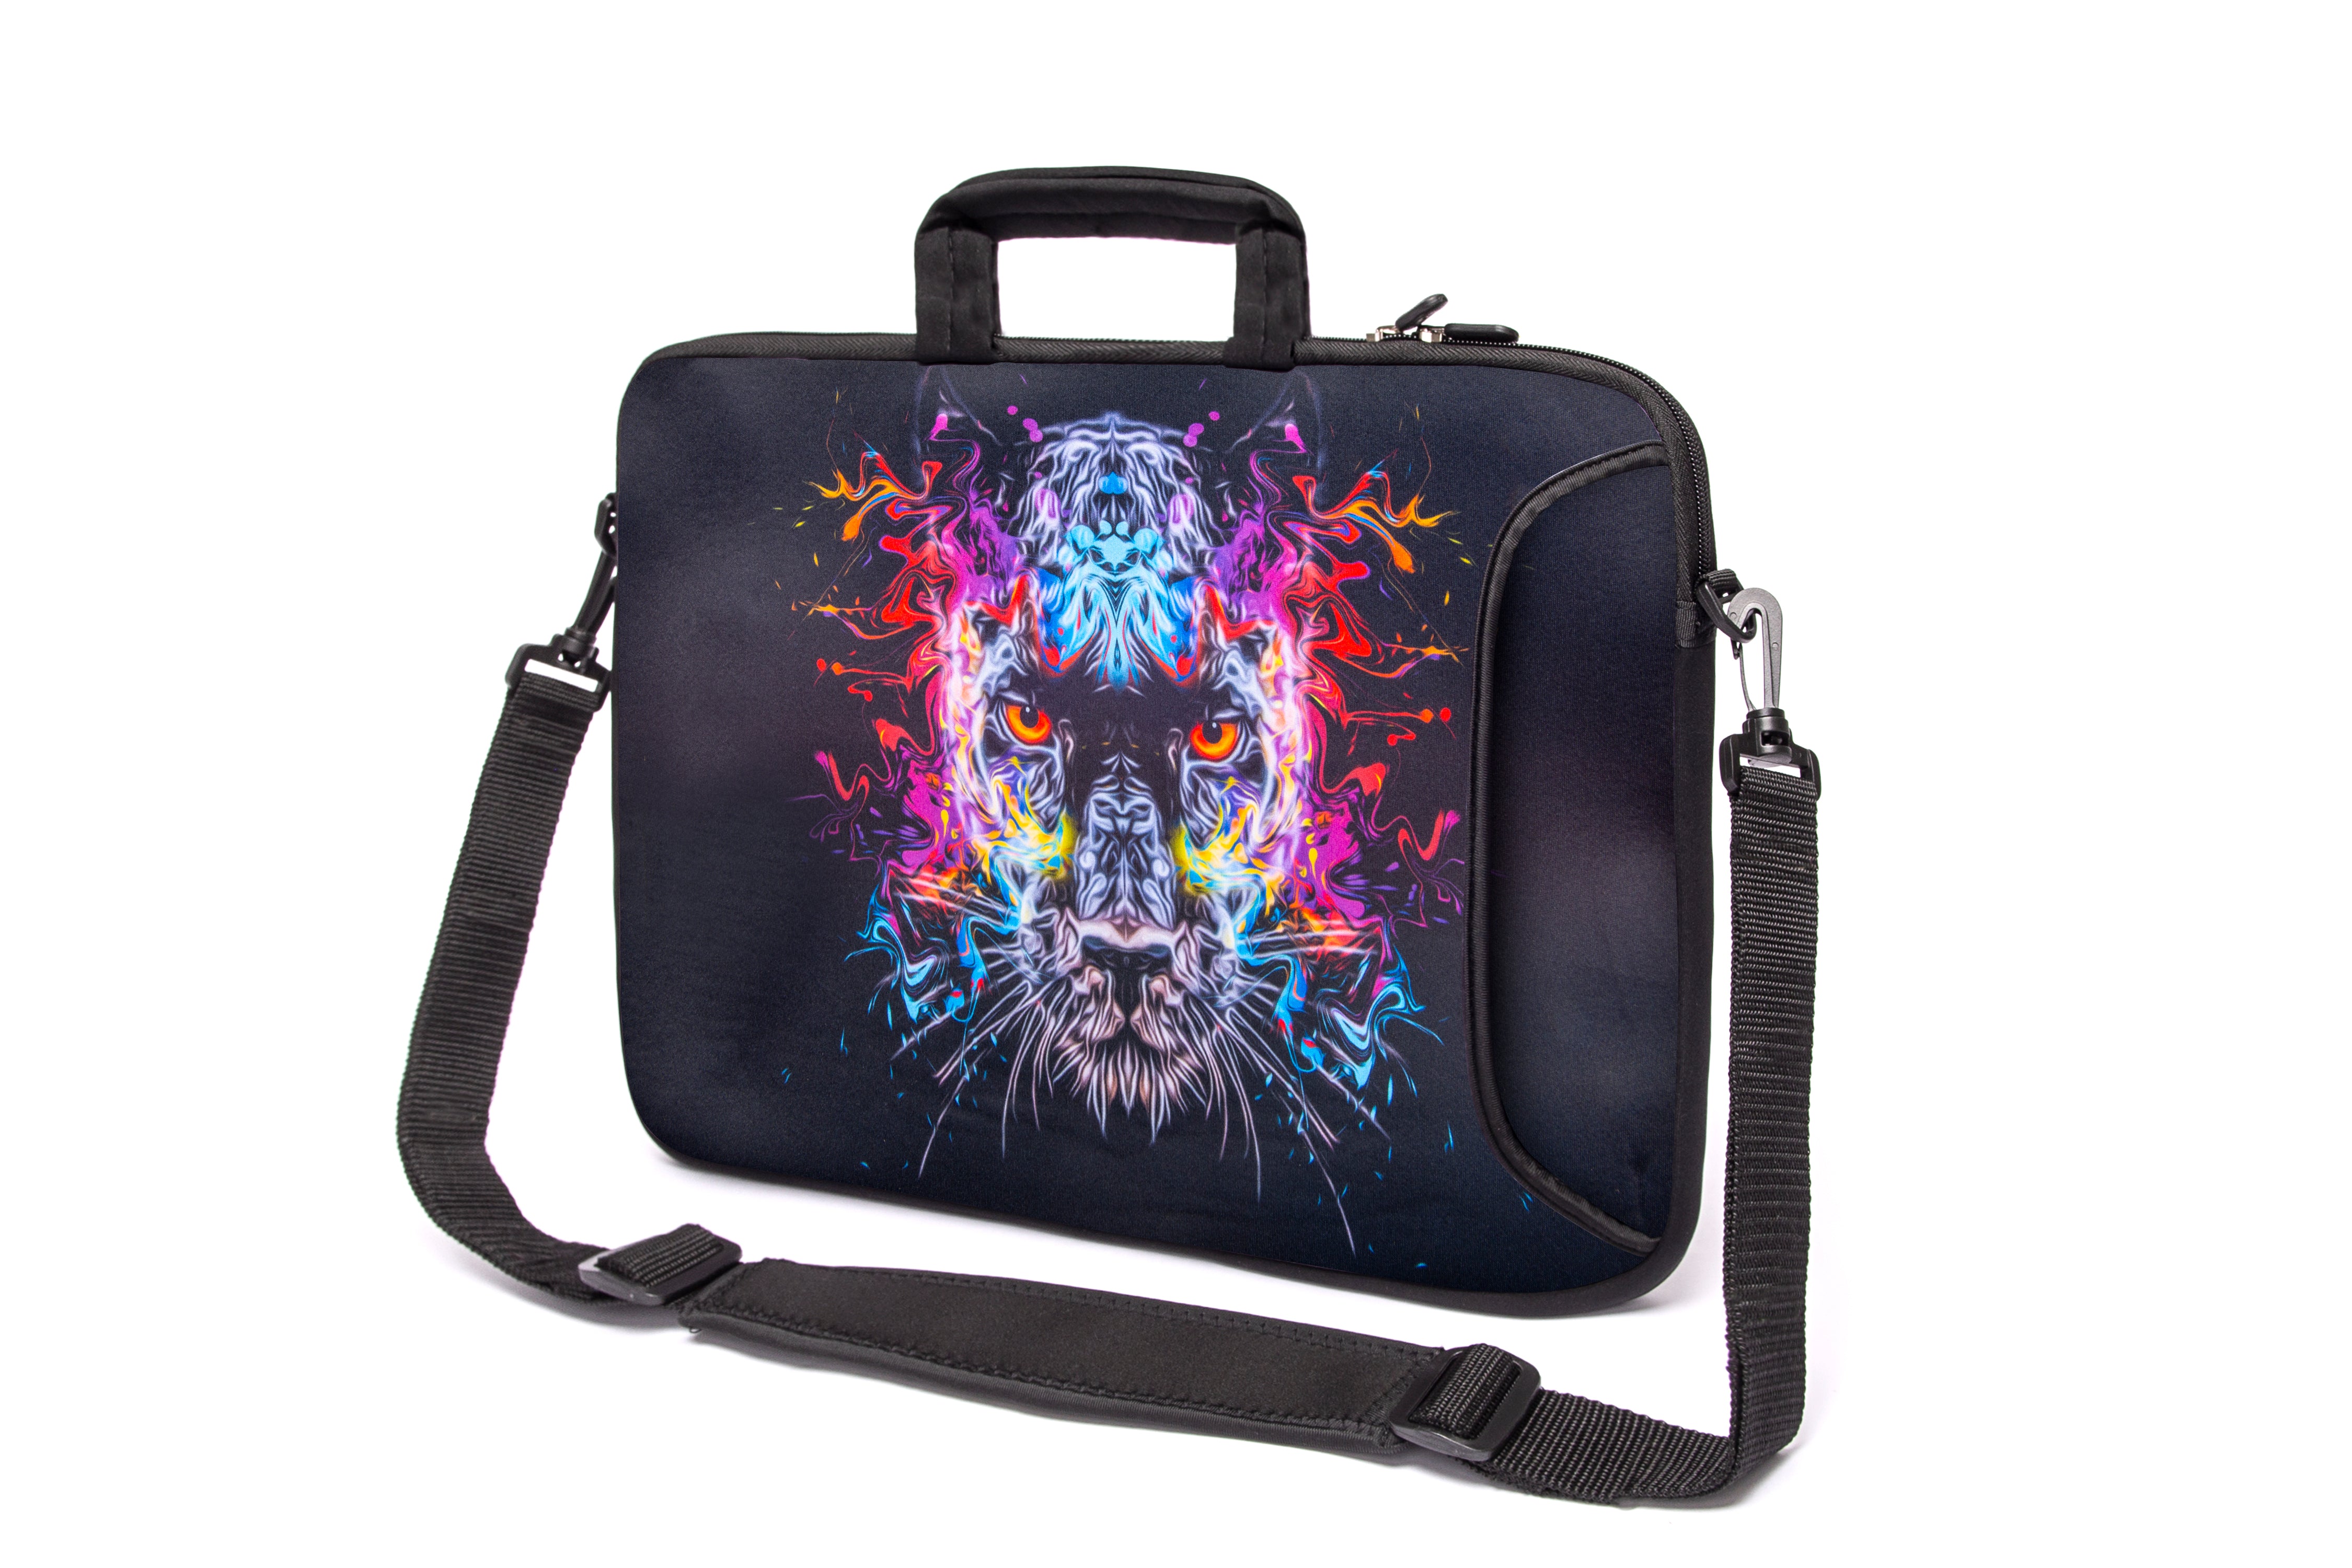 17"- 17.3" (inch) LAPTOP BAG/CASE WITH HANDLE & STRAP, NEOPRENE MADE FOR LAPTOPS/NOTEBOOKS, ZIPPED*COLOR TIGER*